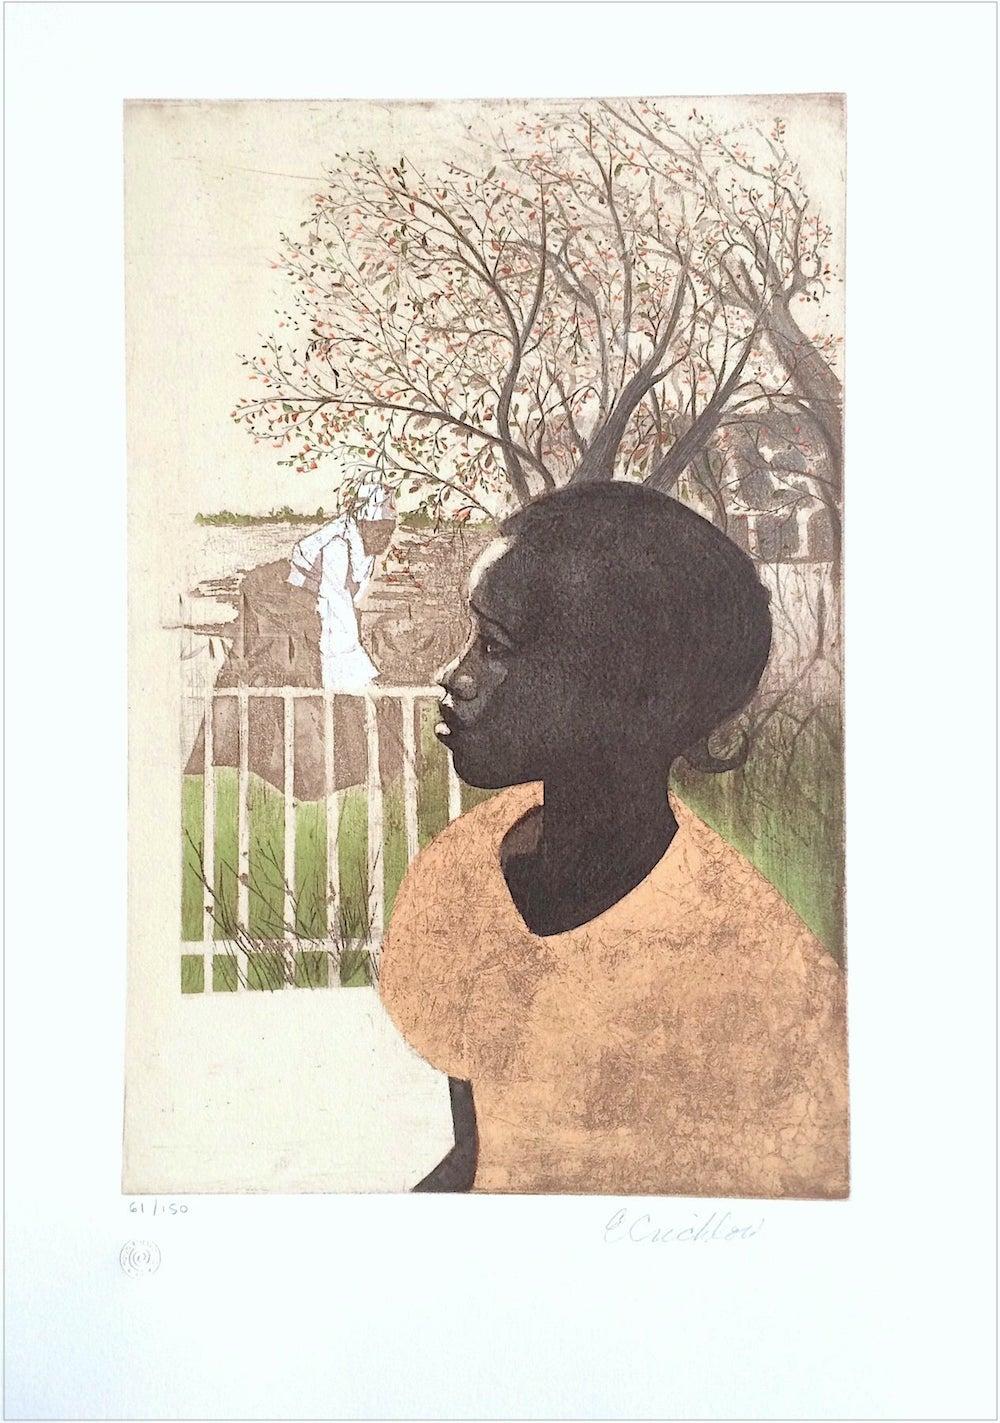 NEW DREAMS is an original limited edition lithograph by the Harlem Renaissance, African-American artist ERNEST CRICHLOW (1914-2005). Printed from hand drawn plates using traditional hand lithography techniques on archival printmaking paper 100% acid